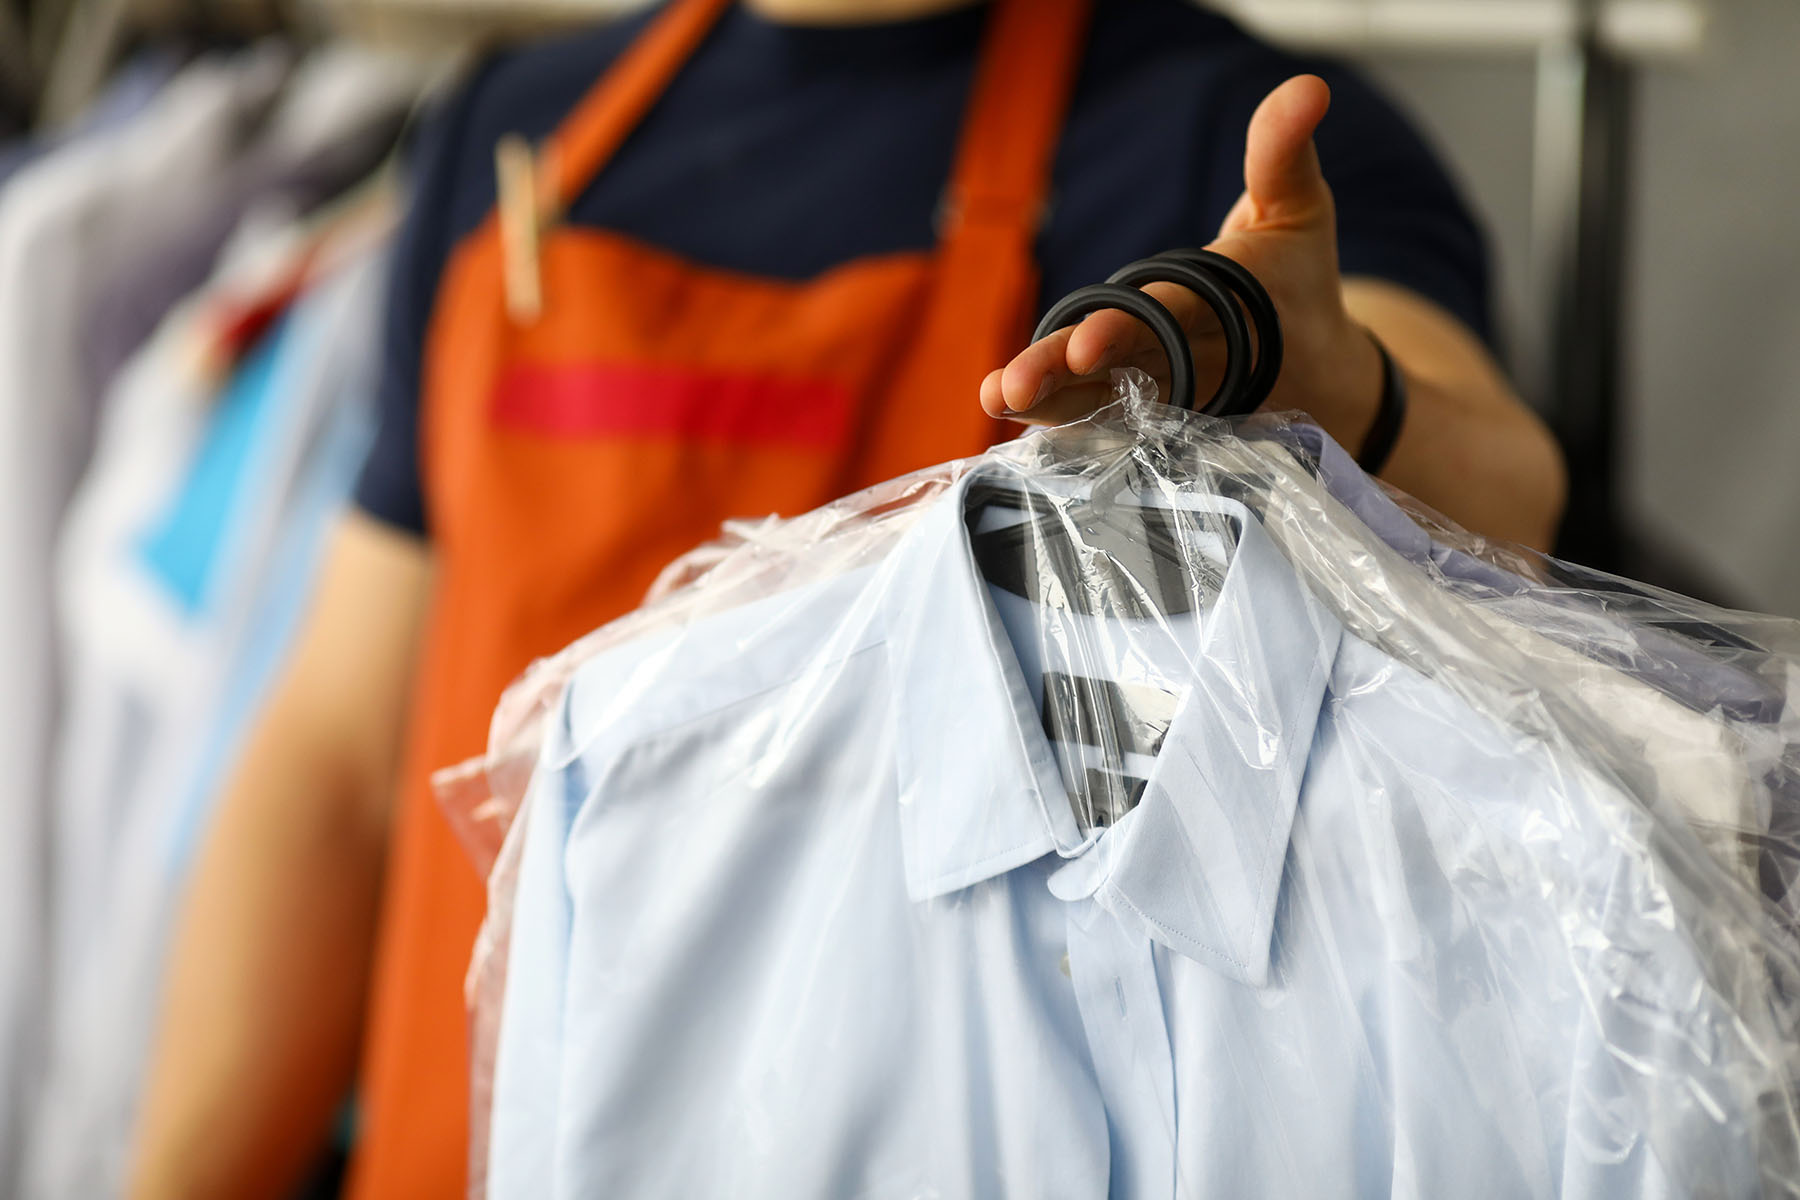 Clothes dry cleaning service